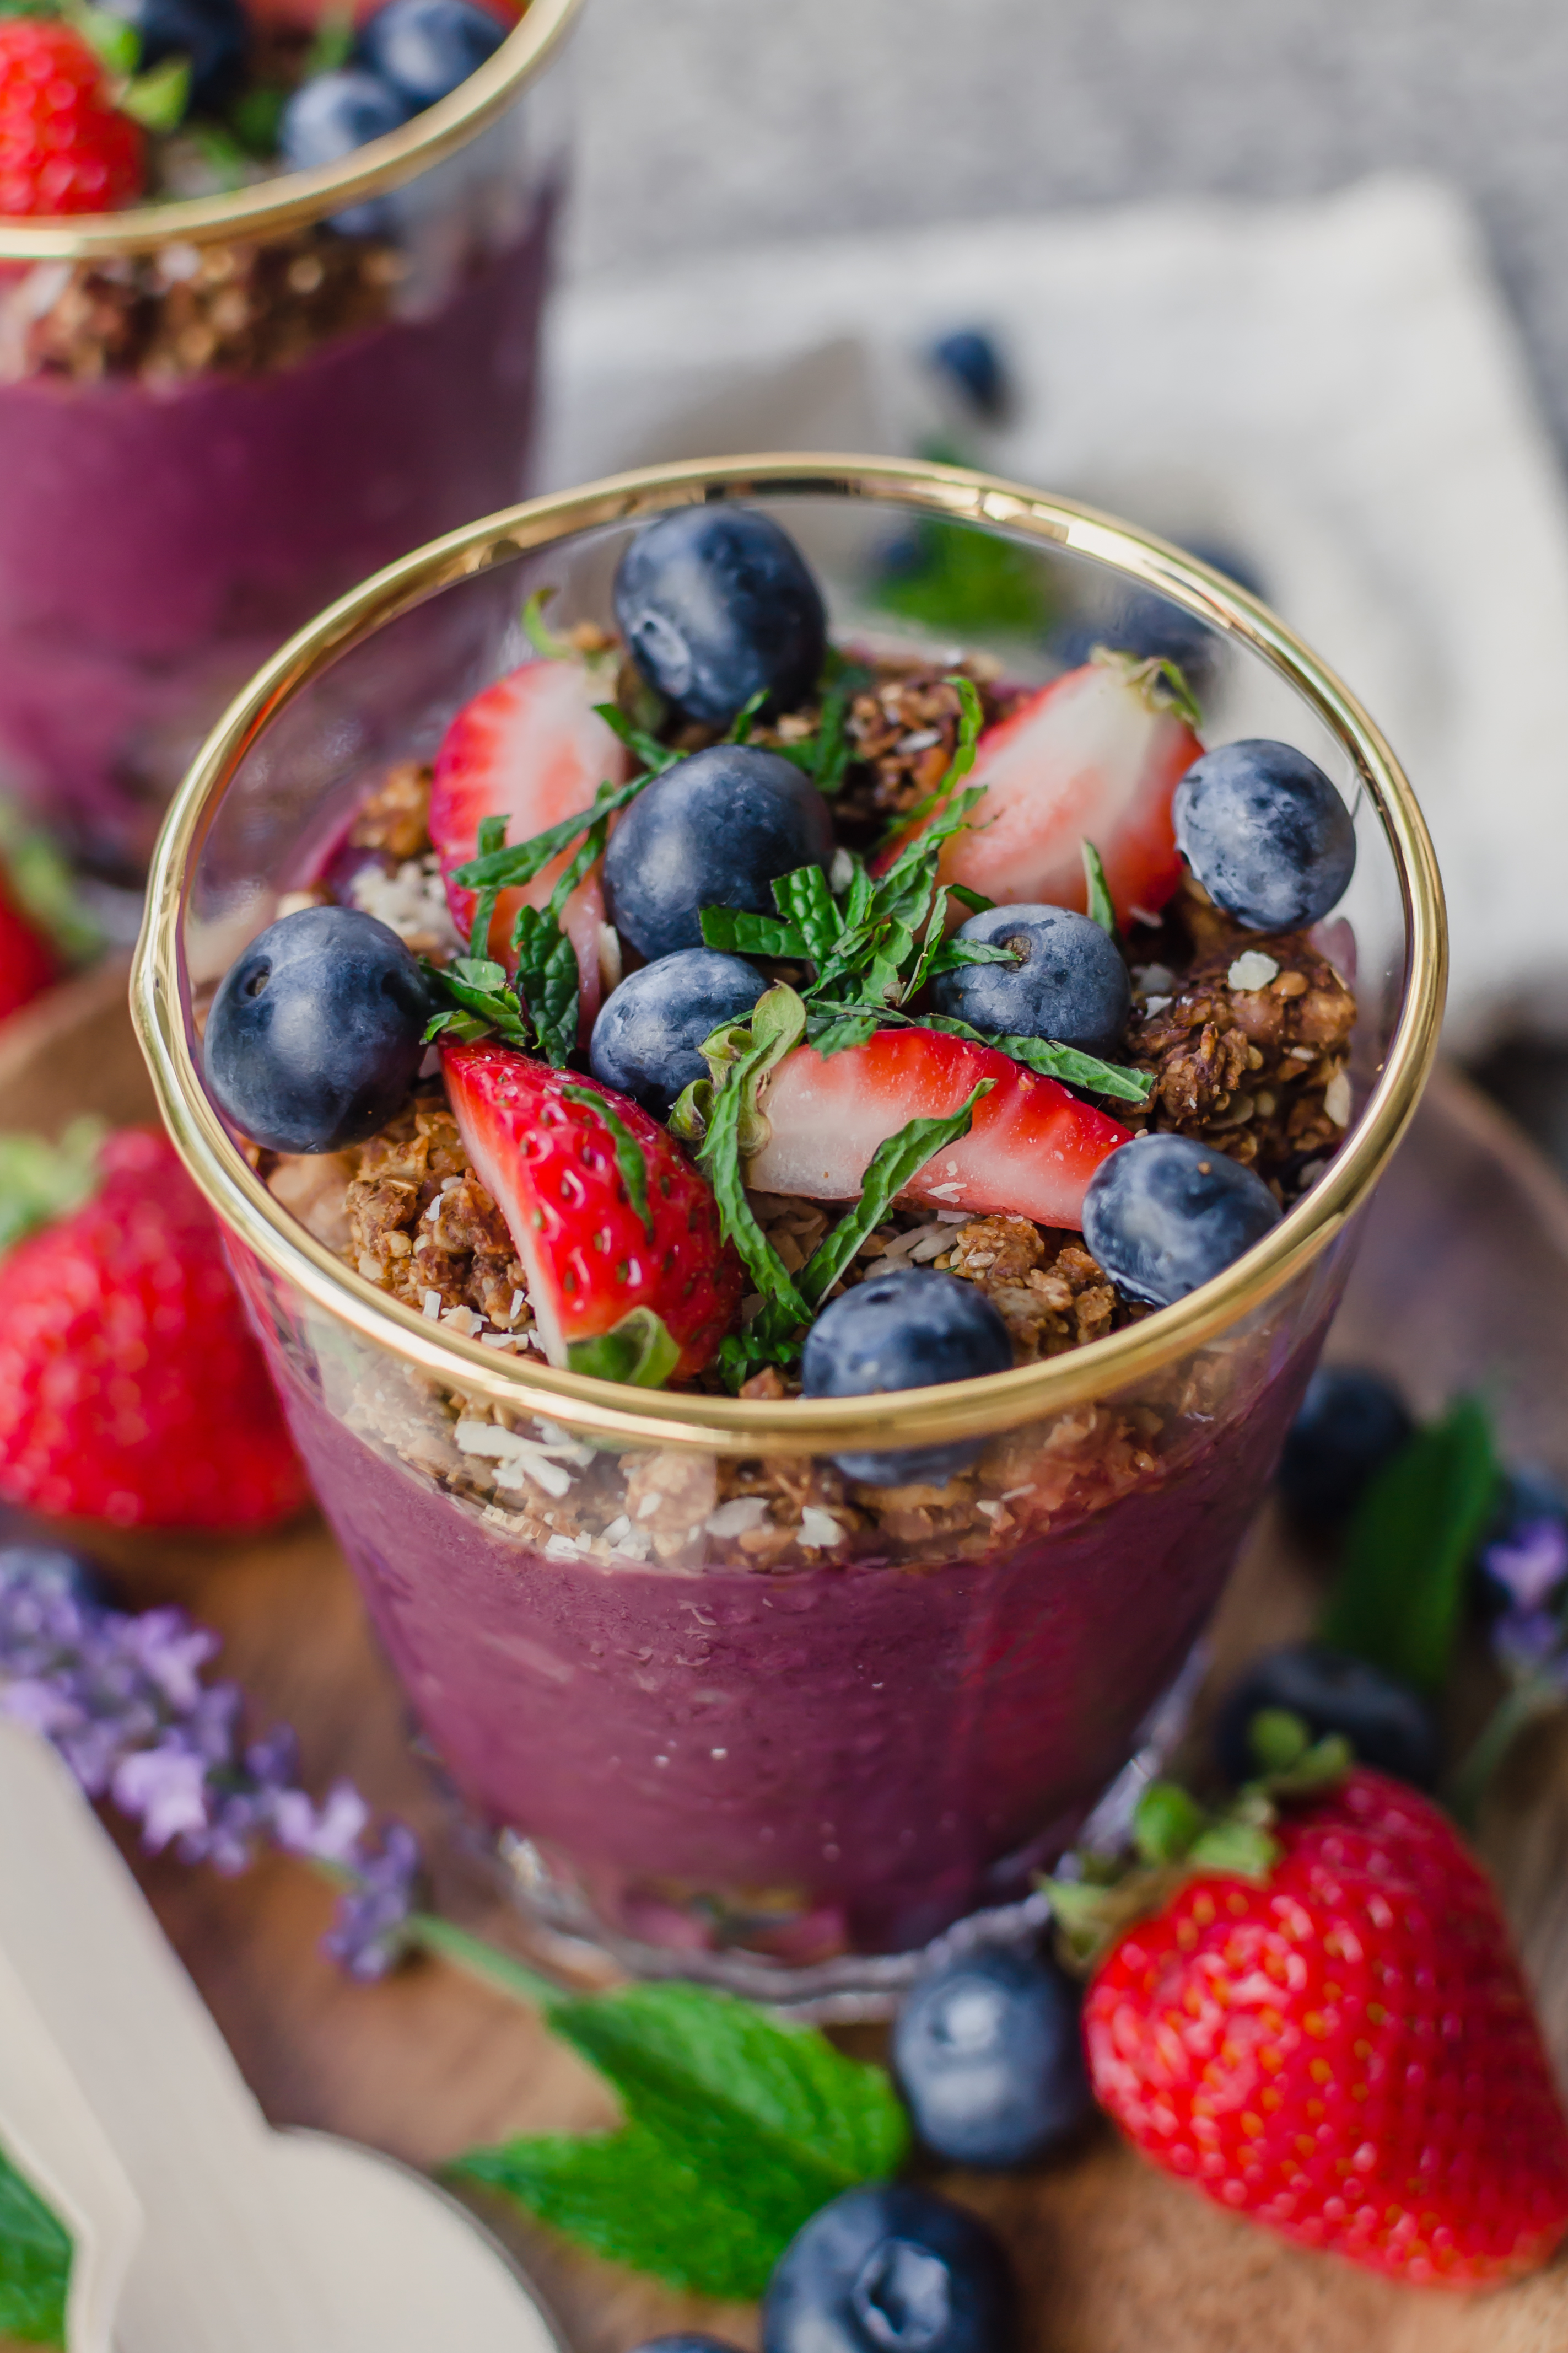 acai parfaits in a cup with berries and mint